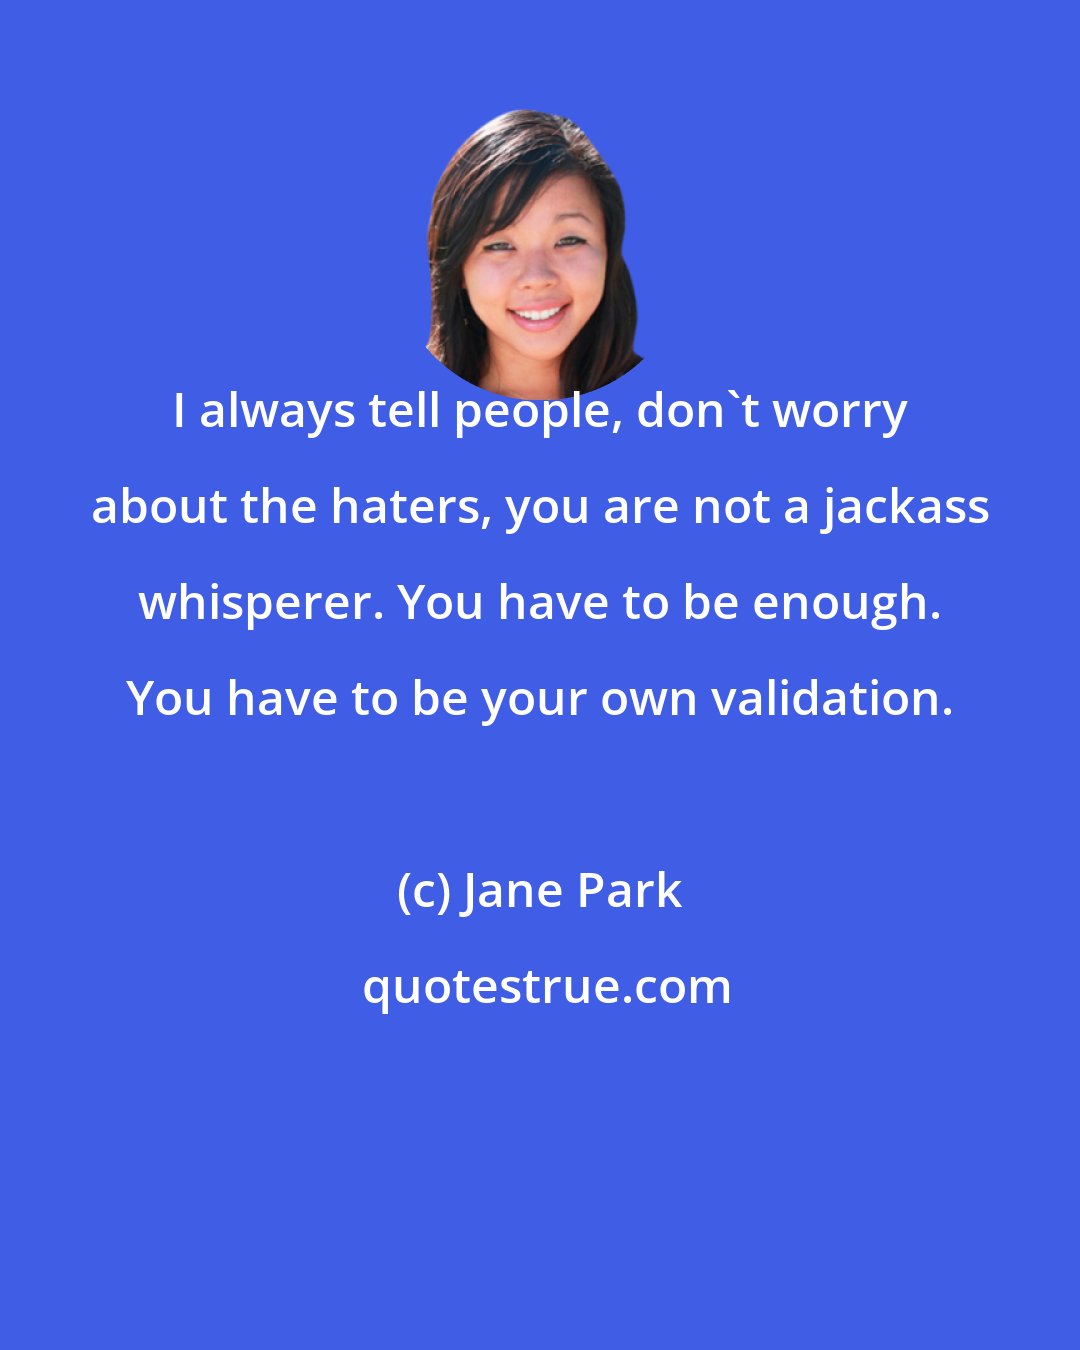 Jane Park: I always tell people, don't worry about the haters, you are not a jackass whisperer. You have to be enough. You have to be your own validation.